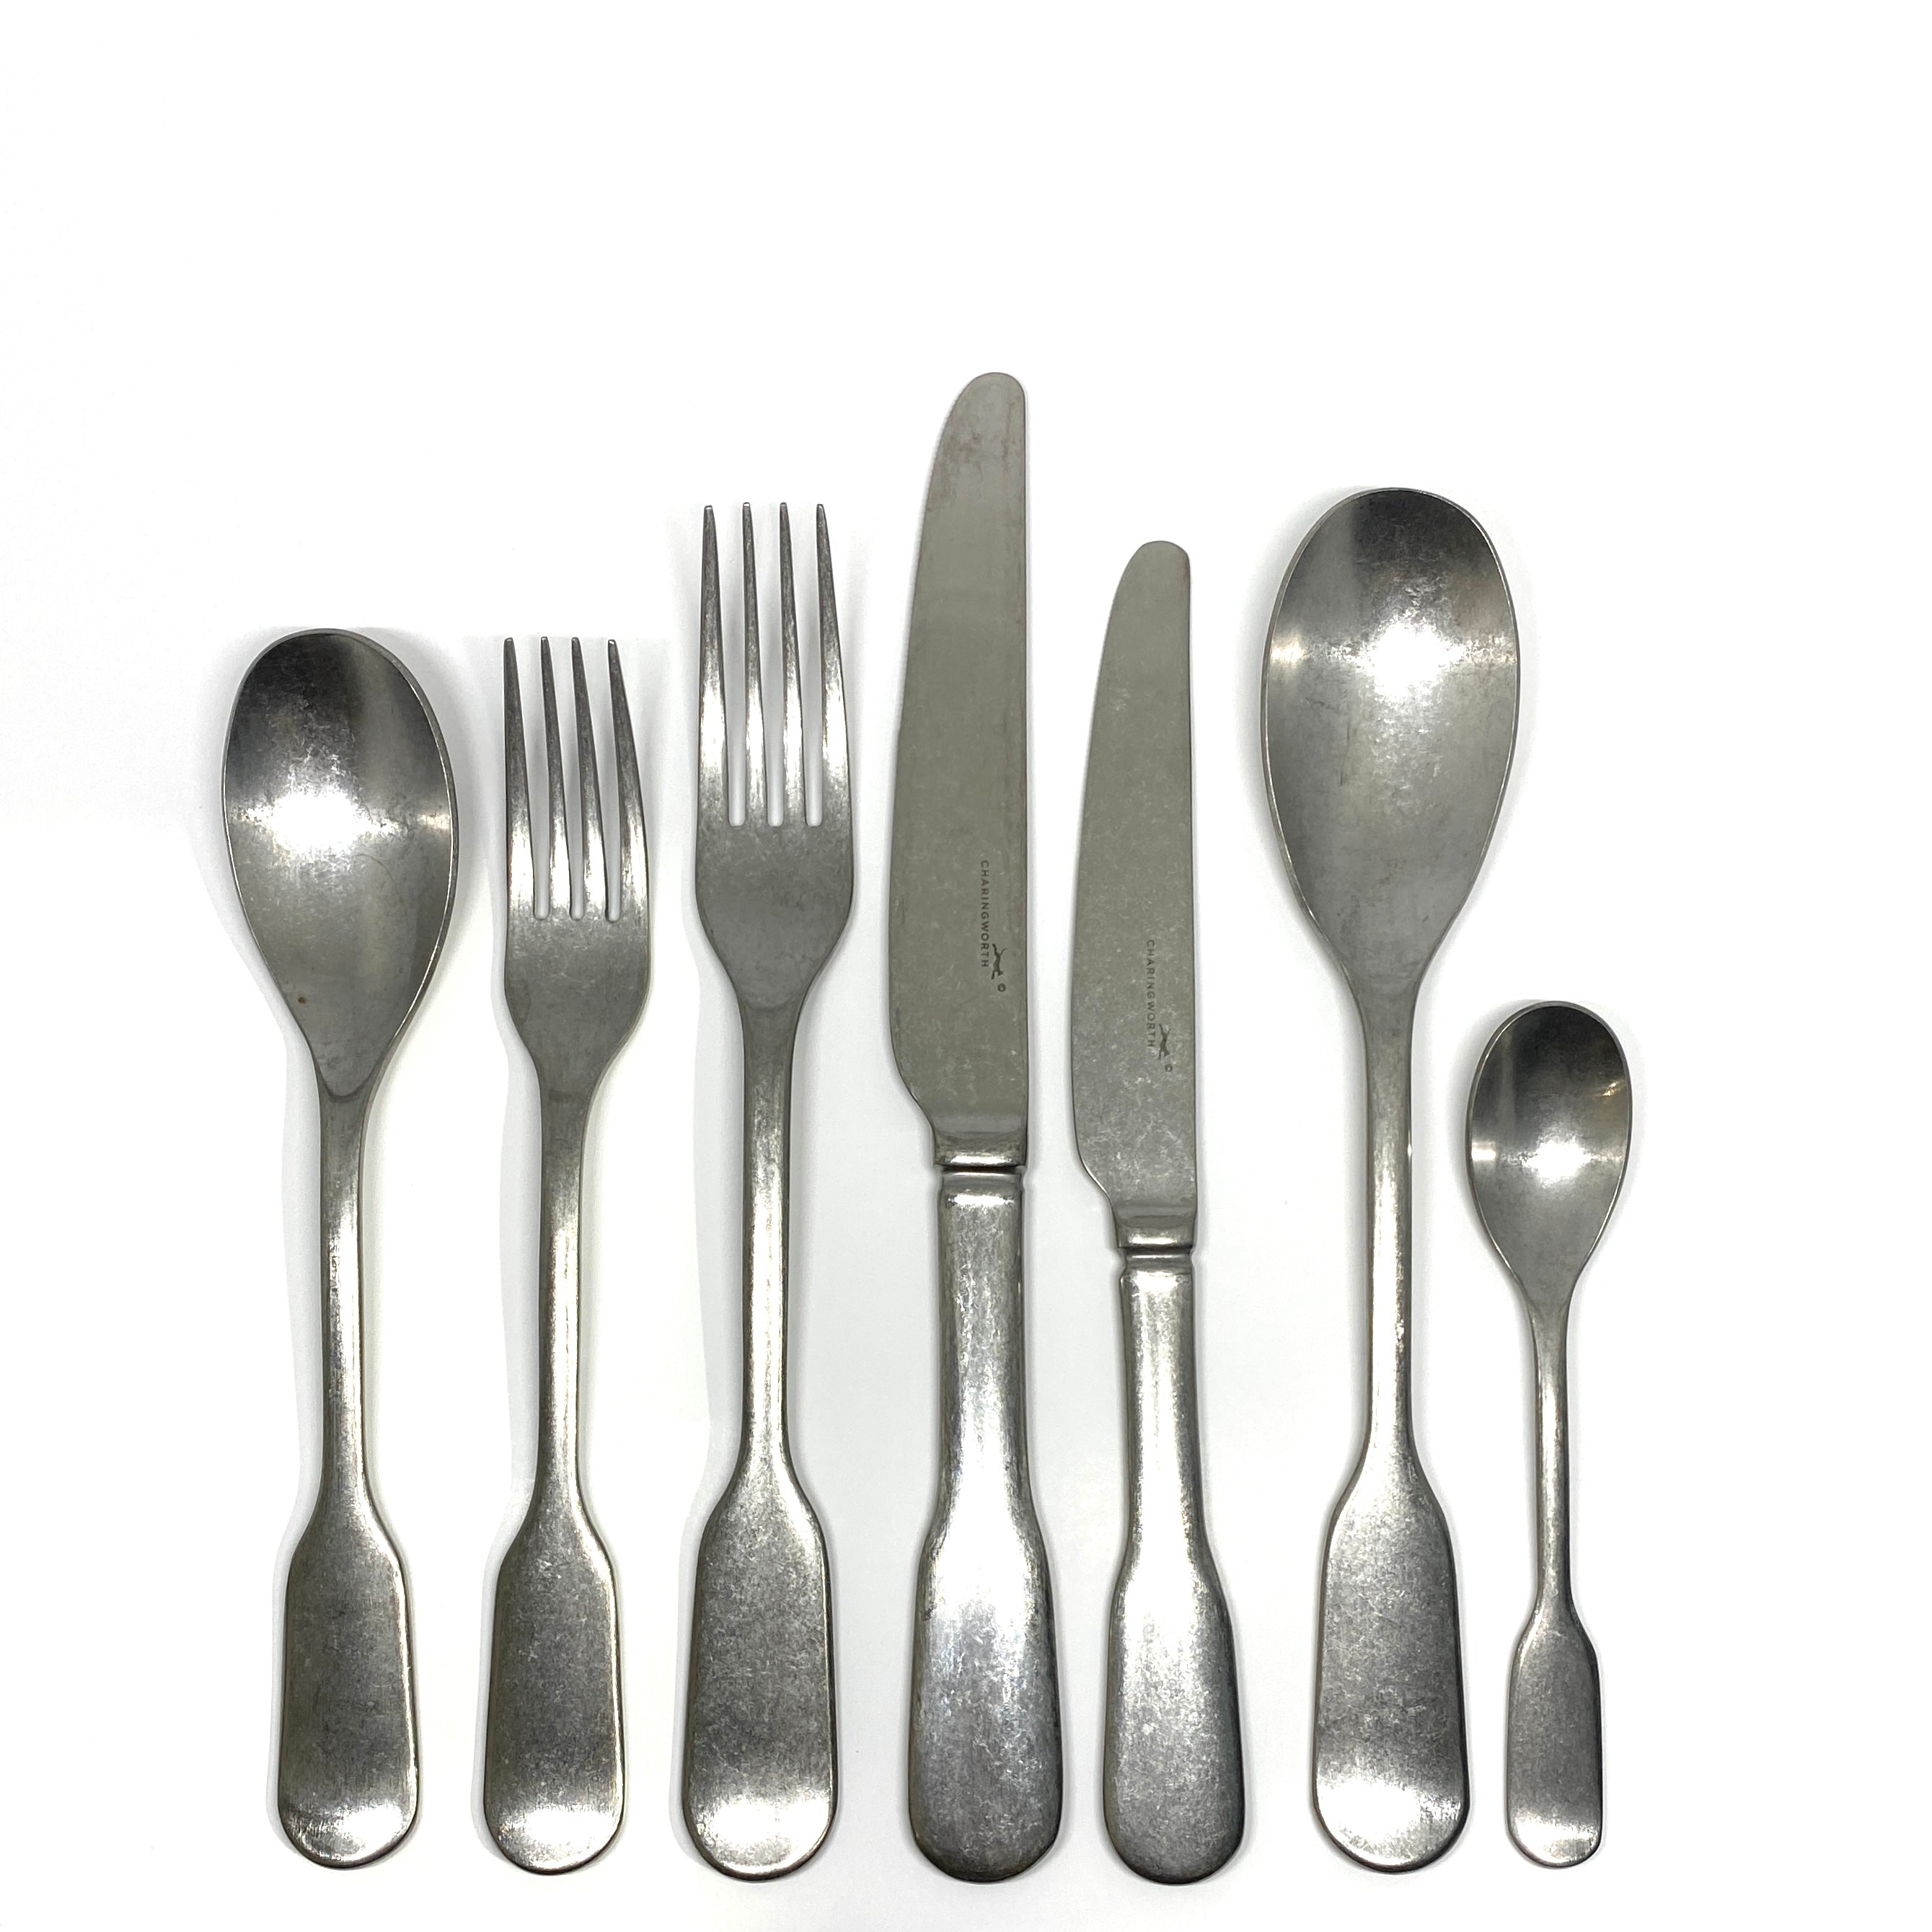 Calais 42 Piece Cutlery Set for six - Vintage Satin Finish - Stainless Steel